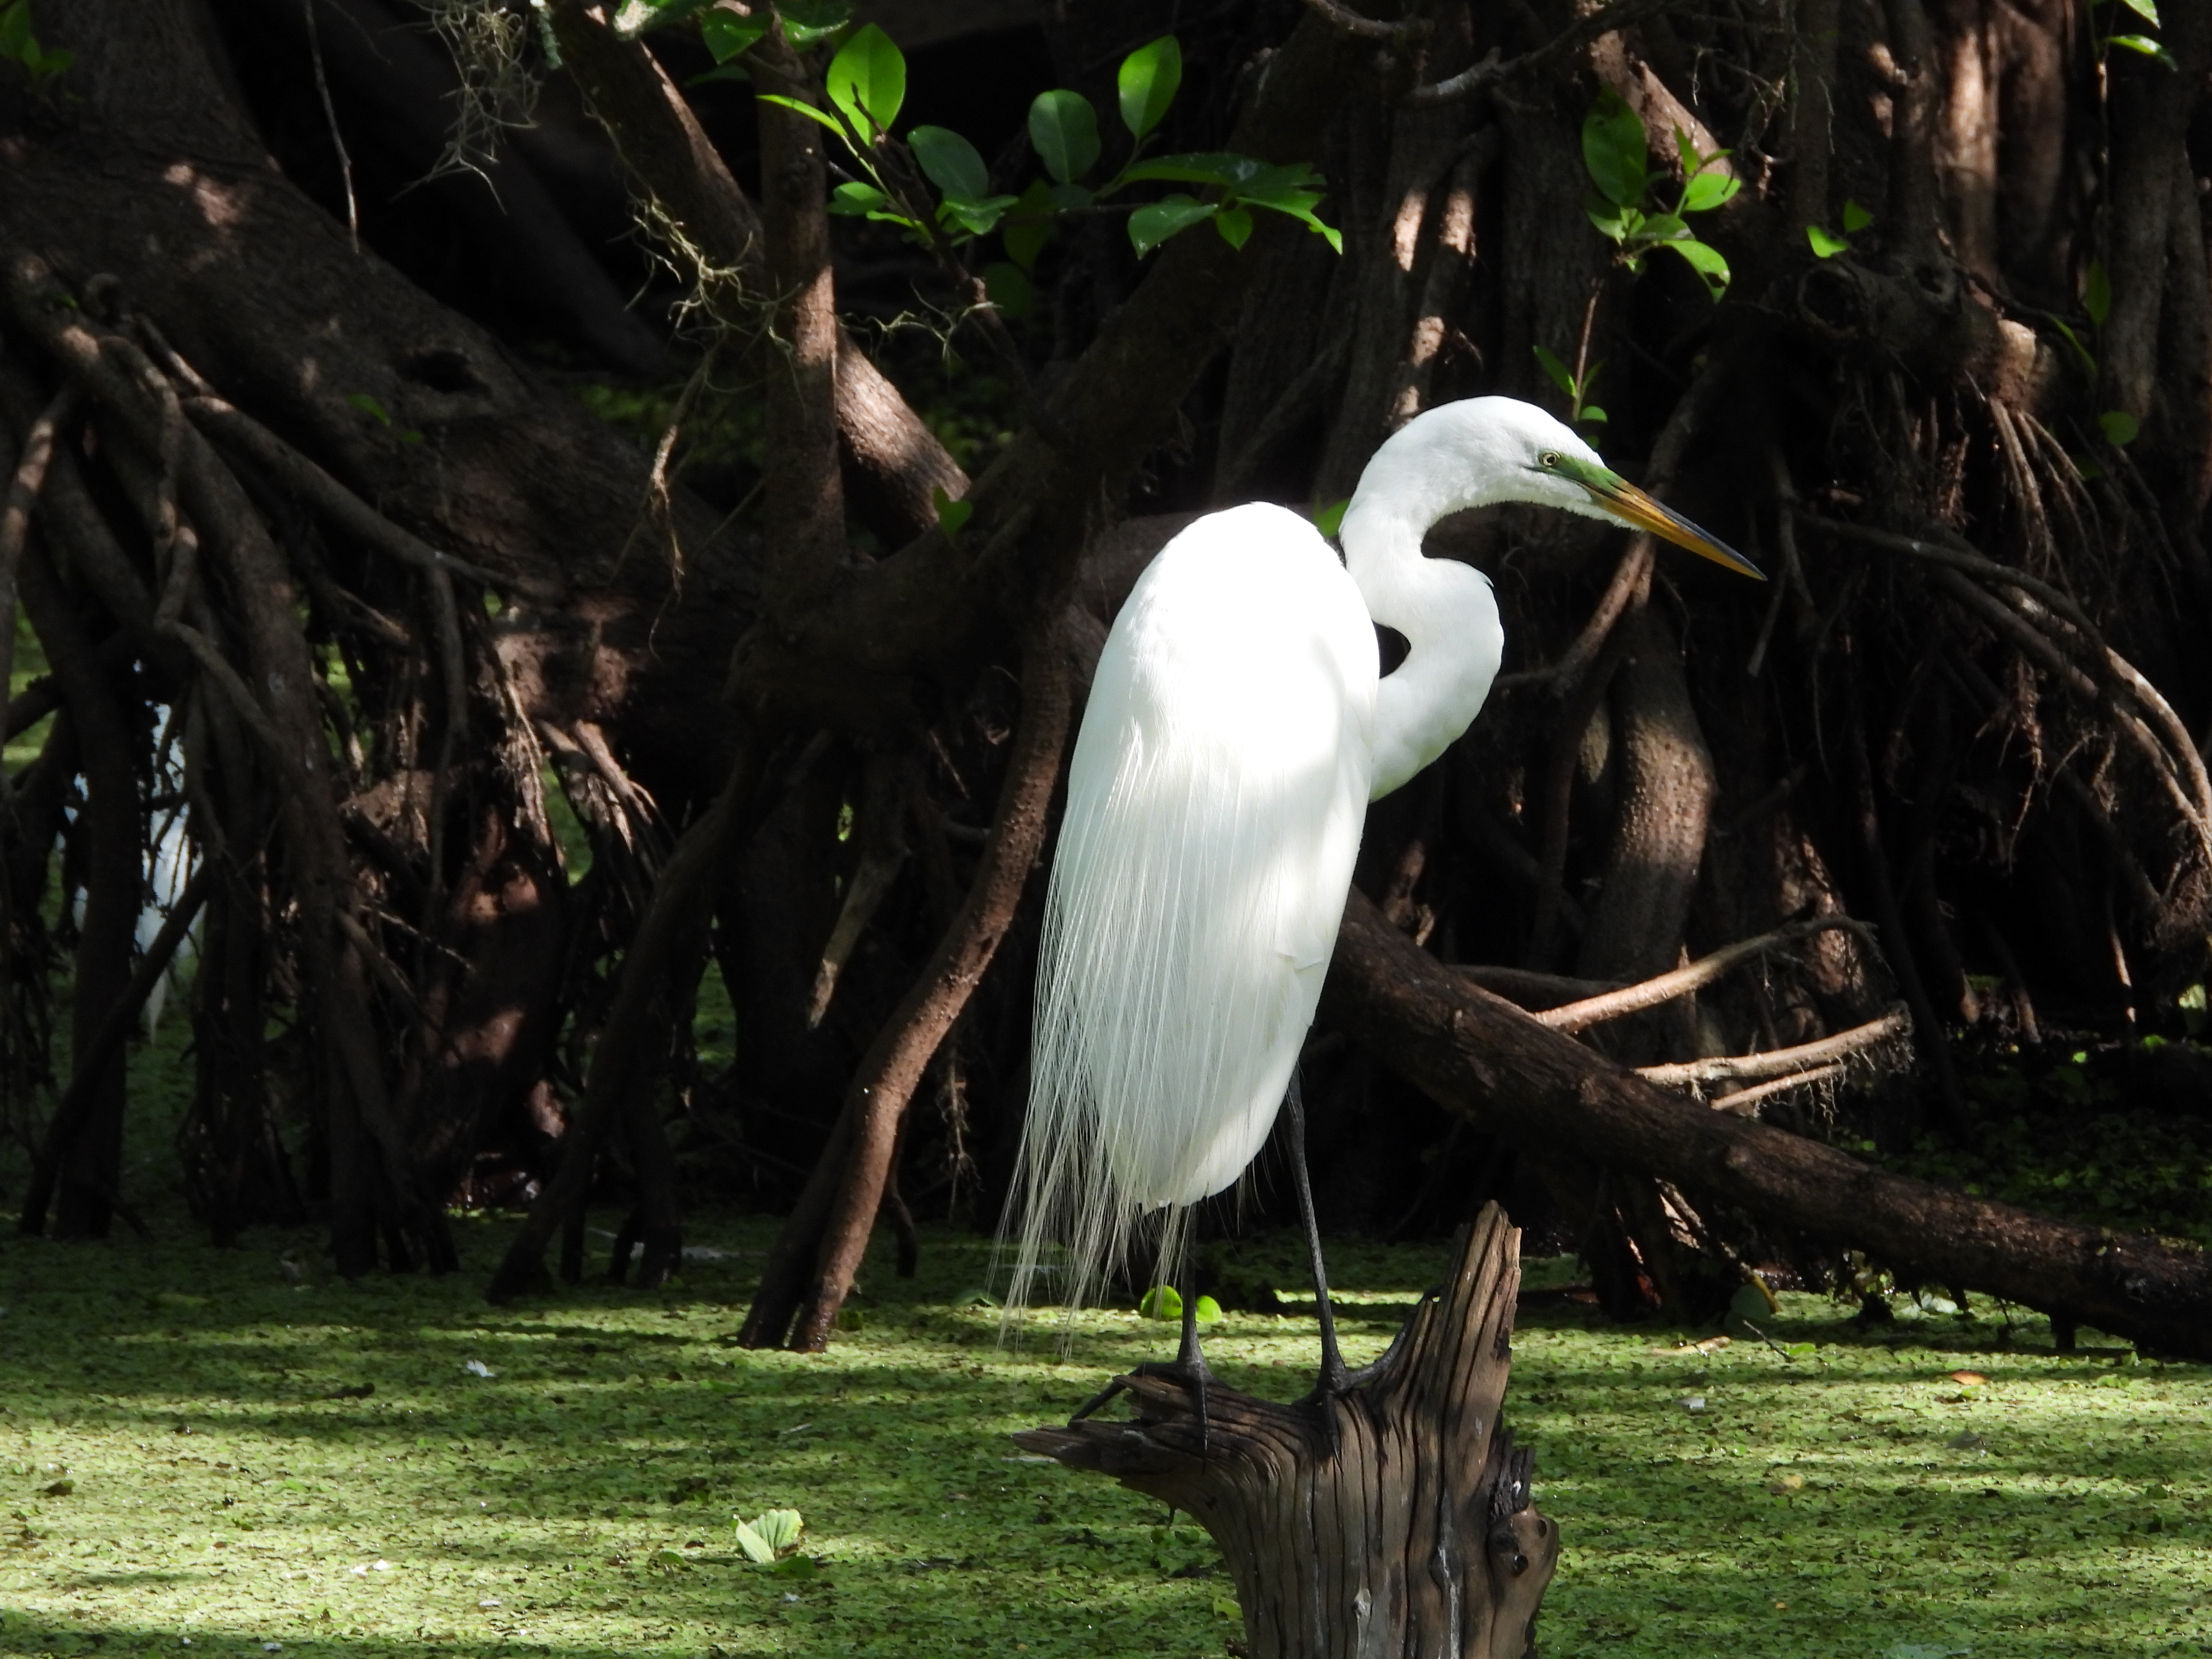 A white bird perched on a branch over water.